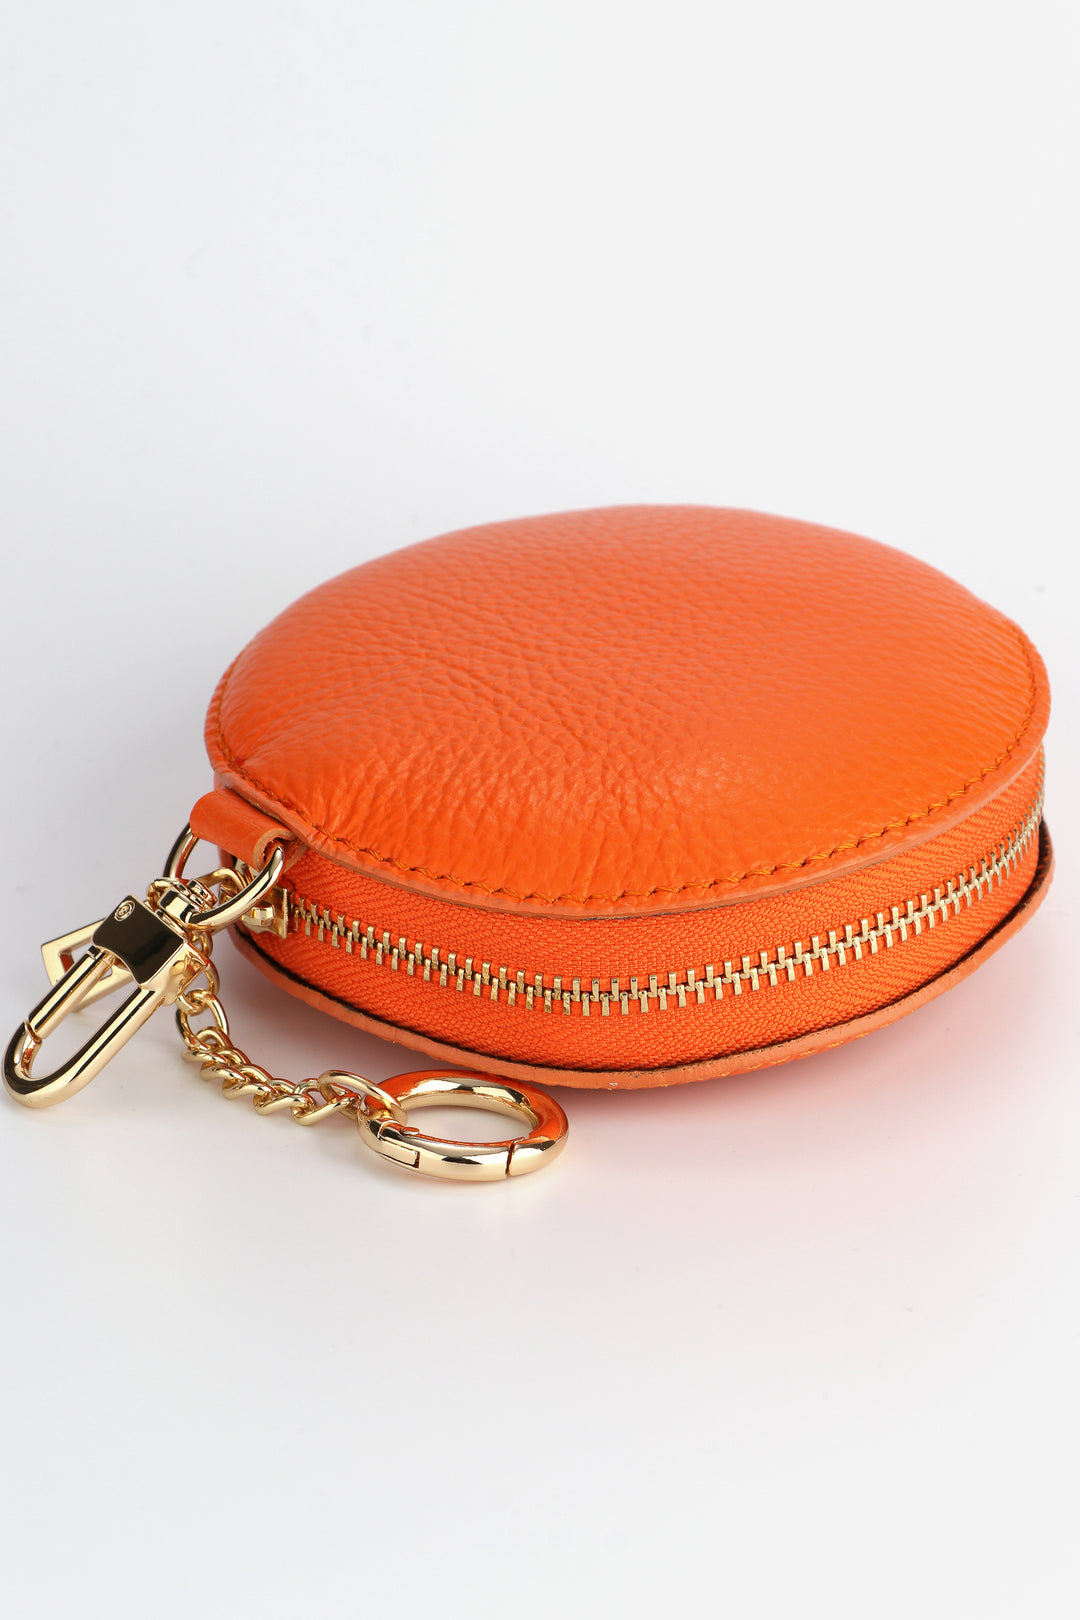 laying flat, showing the secure zip closure of the round orange coin purse